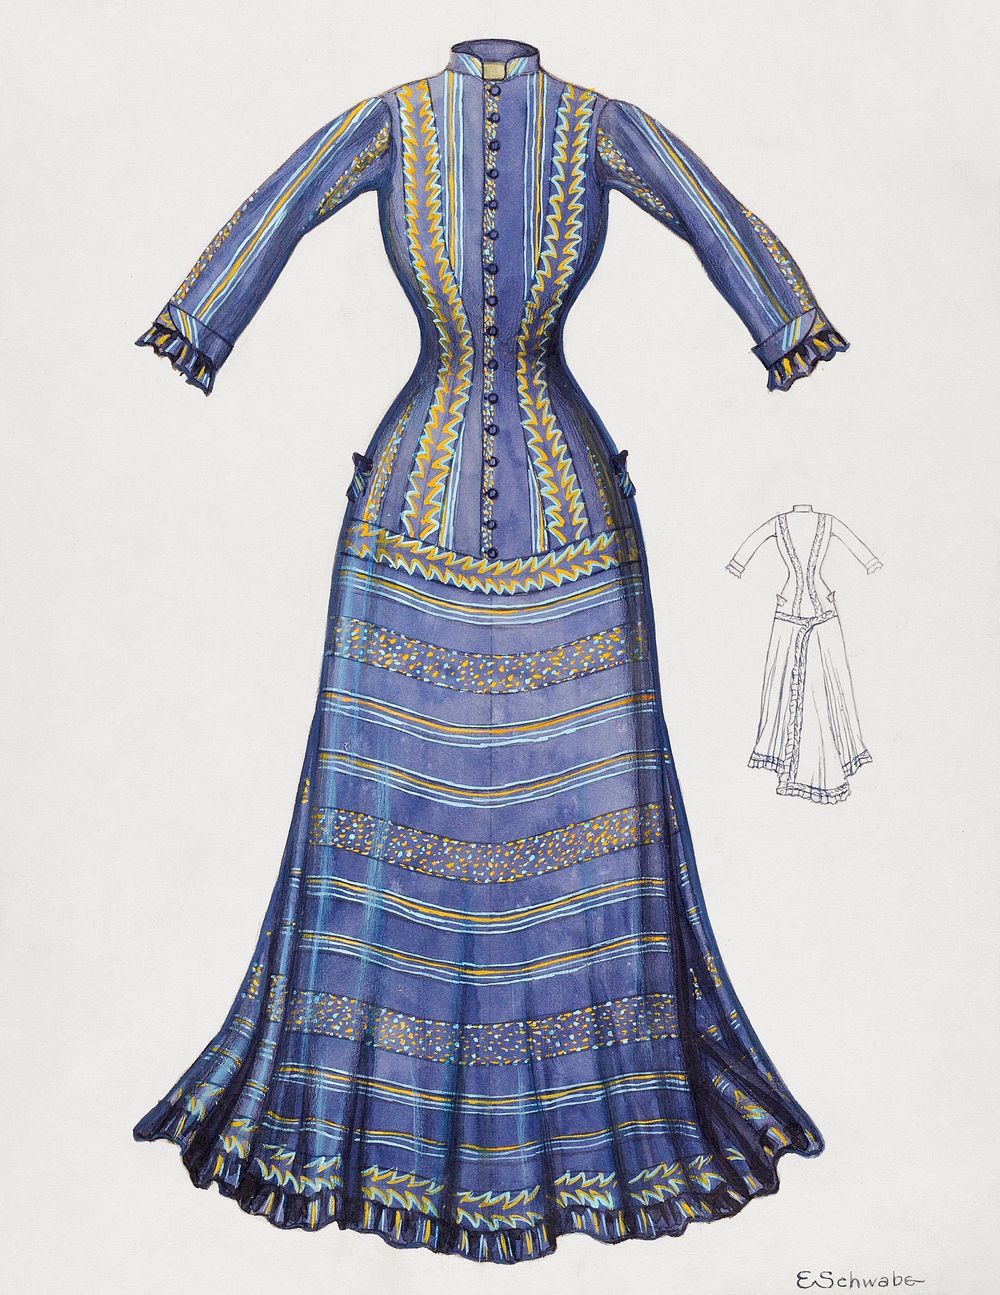 Dress (c. 1936) by Erwin Schwabe. Original from The National Gallery of Art. Digitally enhanced by rawpixel.